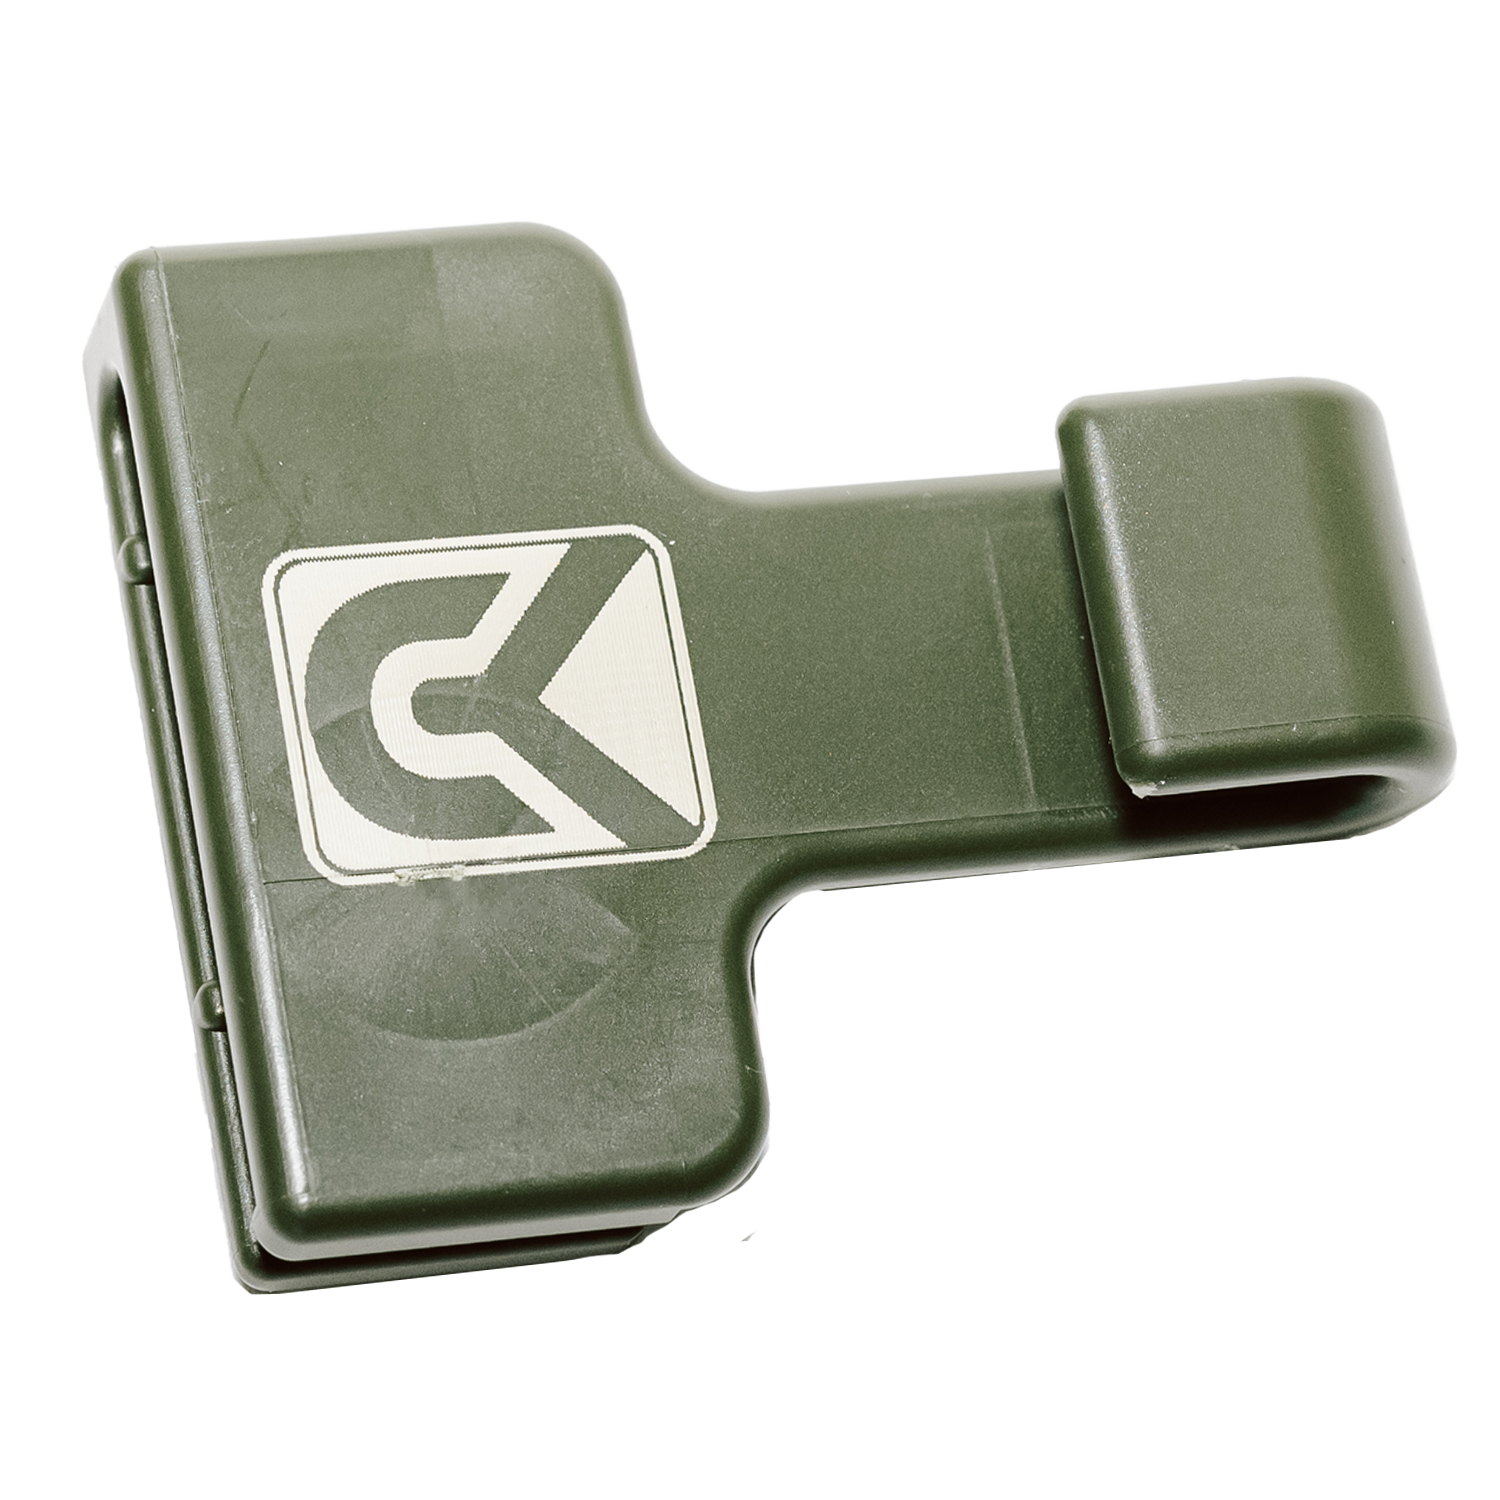 CarryKeeper Single Pack - OD GREEN